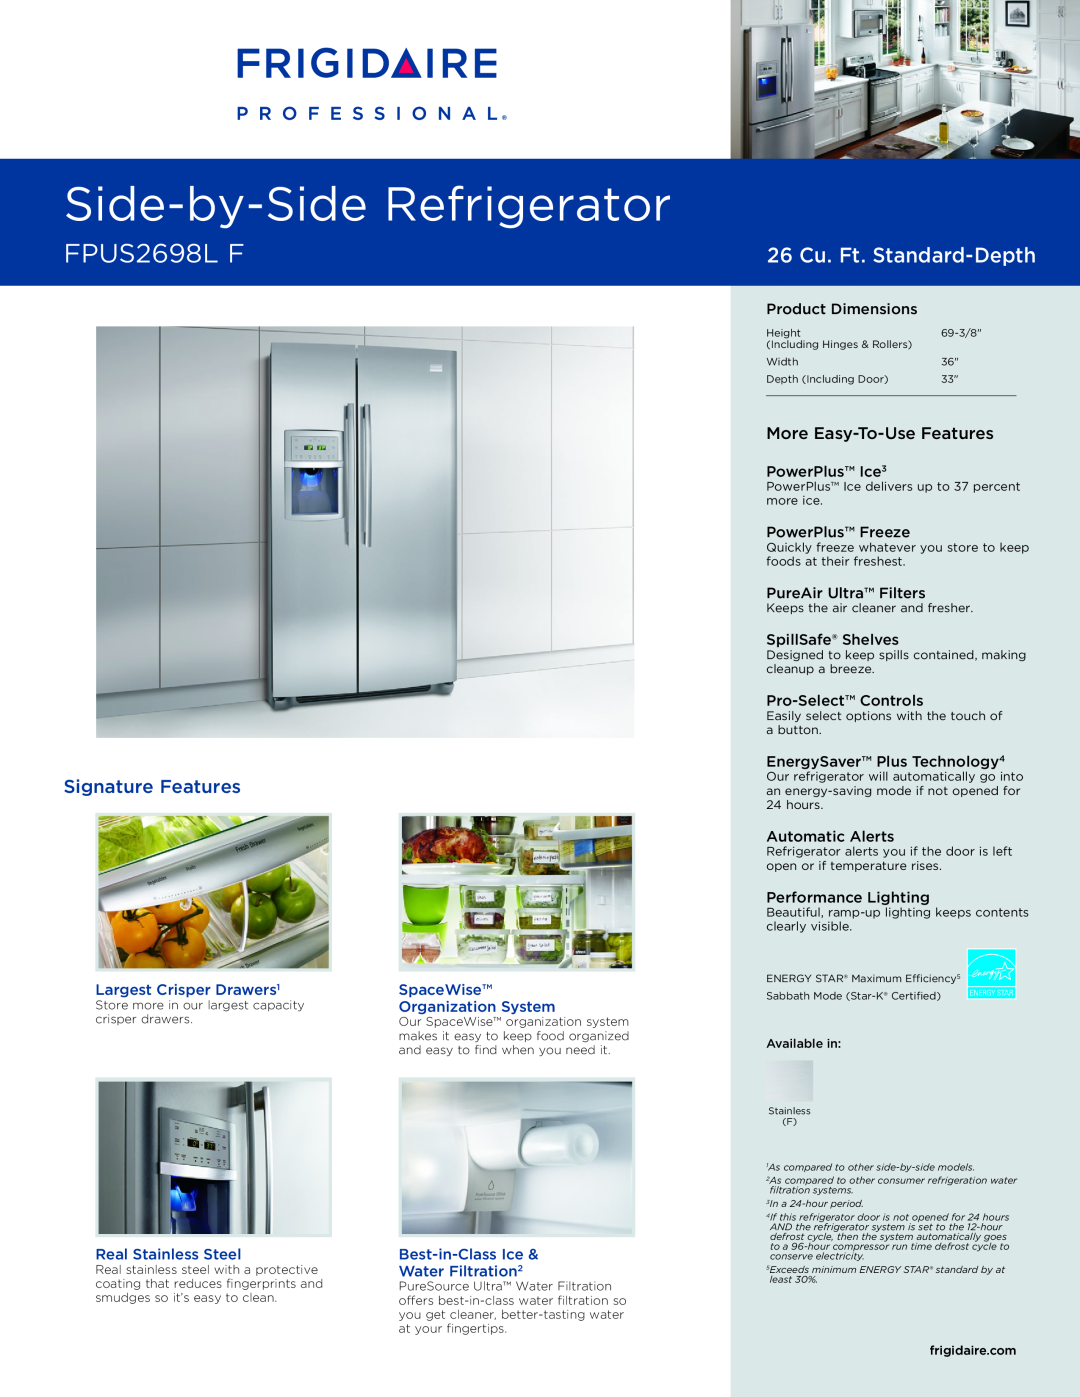 Frigidaire FPUS2698L F dimensions Side-by-SideRefrigerator, 26 Cu. Ft. Standard-Depth, Signature Features, SpaceWise 